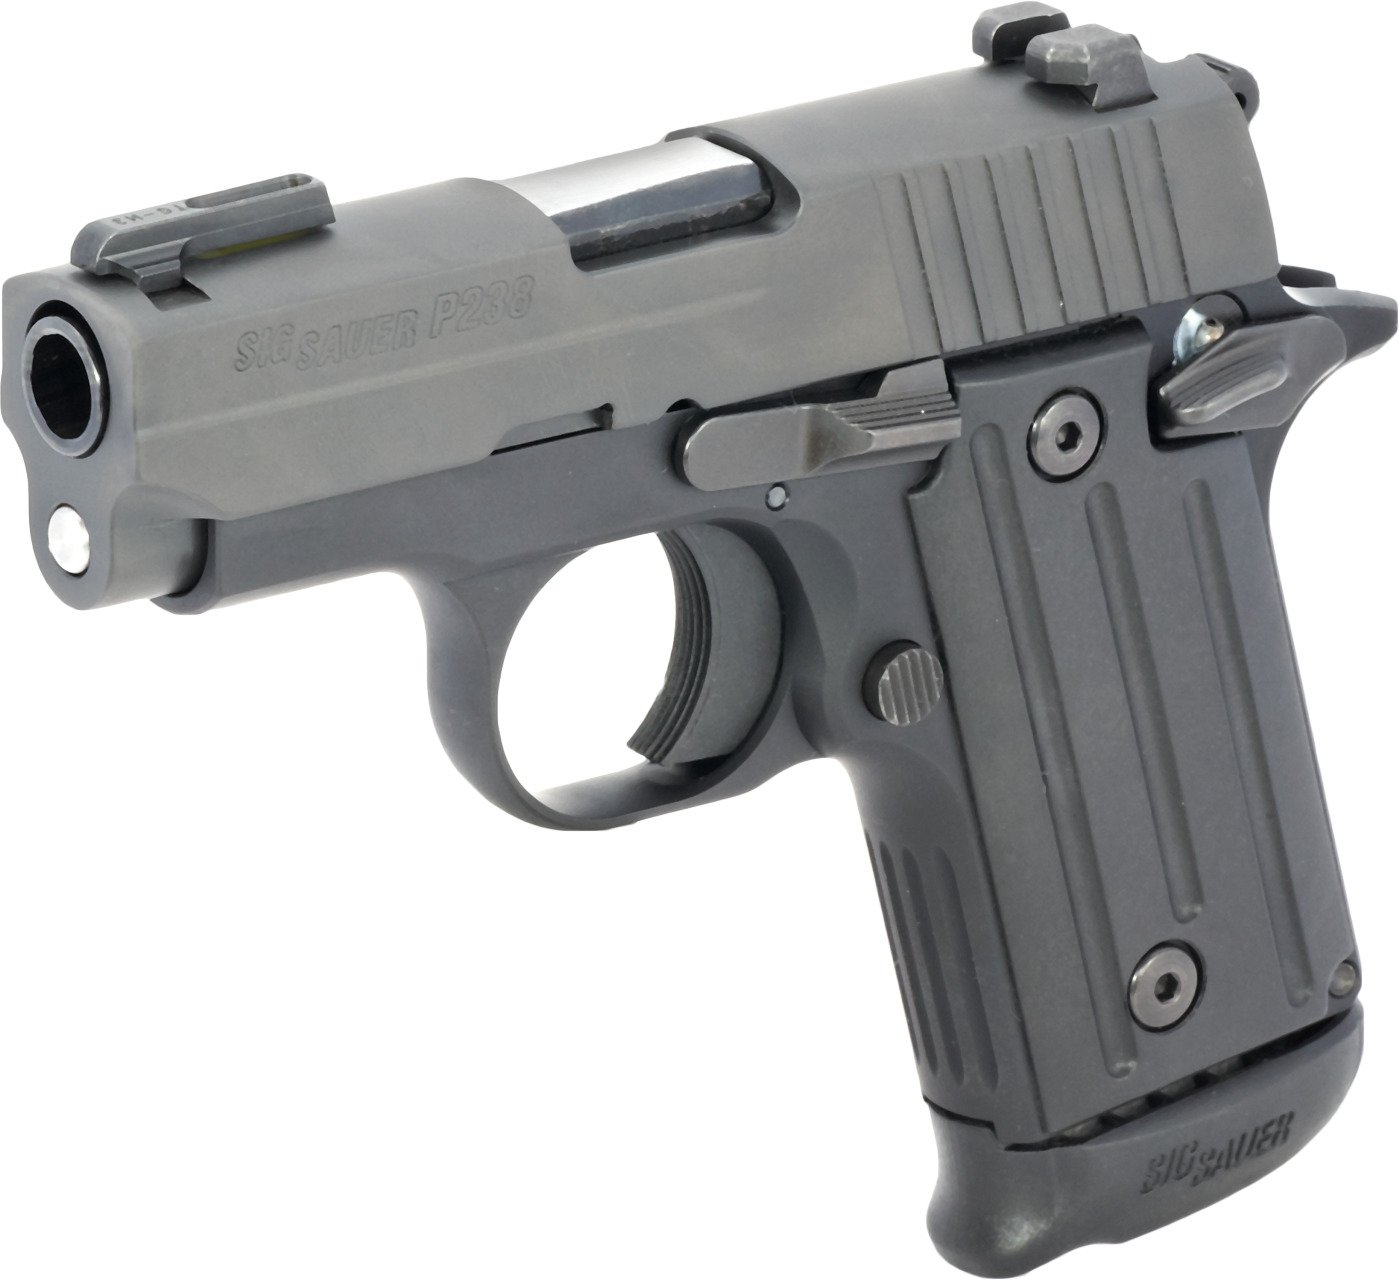 Sig Sauer P238 Academy Exclusive NS 380 ACP Sub-Compact 7-Round Pistol